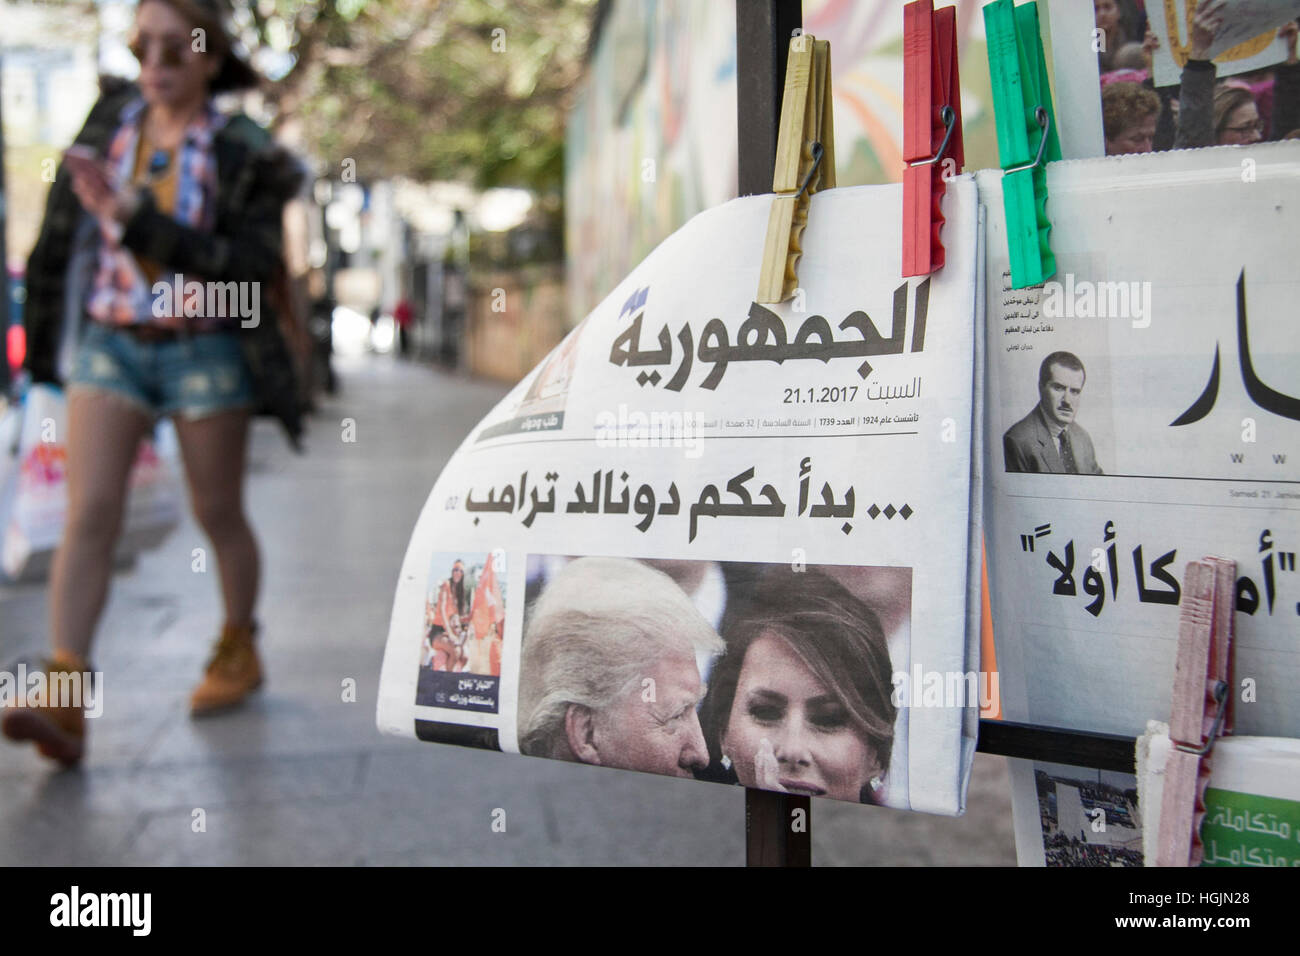 Beirut, Lebanon. 22nd January, 2017. A Newspaper stand in Beirut displays Arabic newspapers featuring the Inauguration of President Donald Trump Credit: amer ghazzal/Alamy Live News Stock Photo